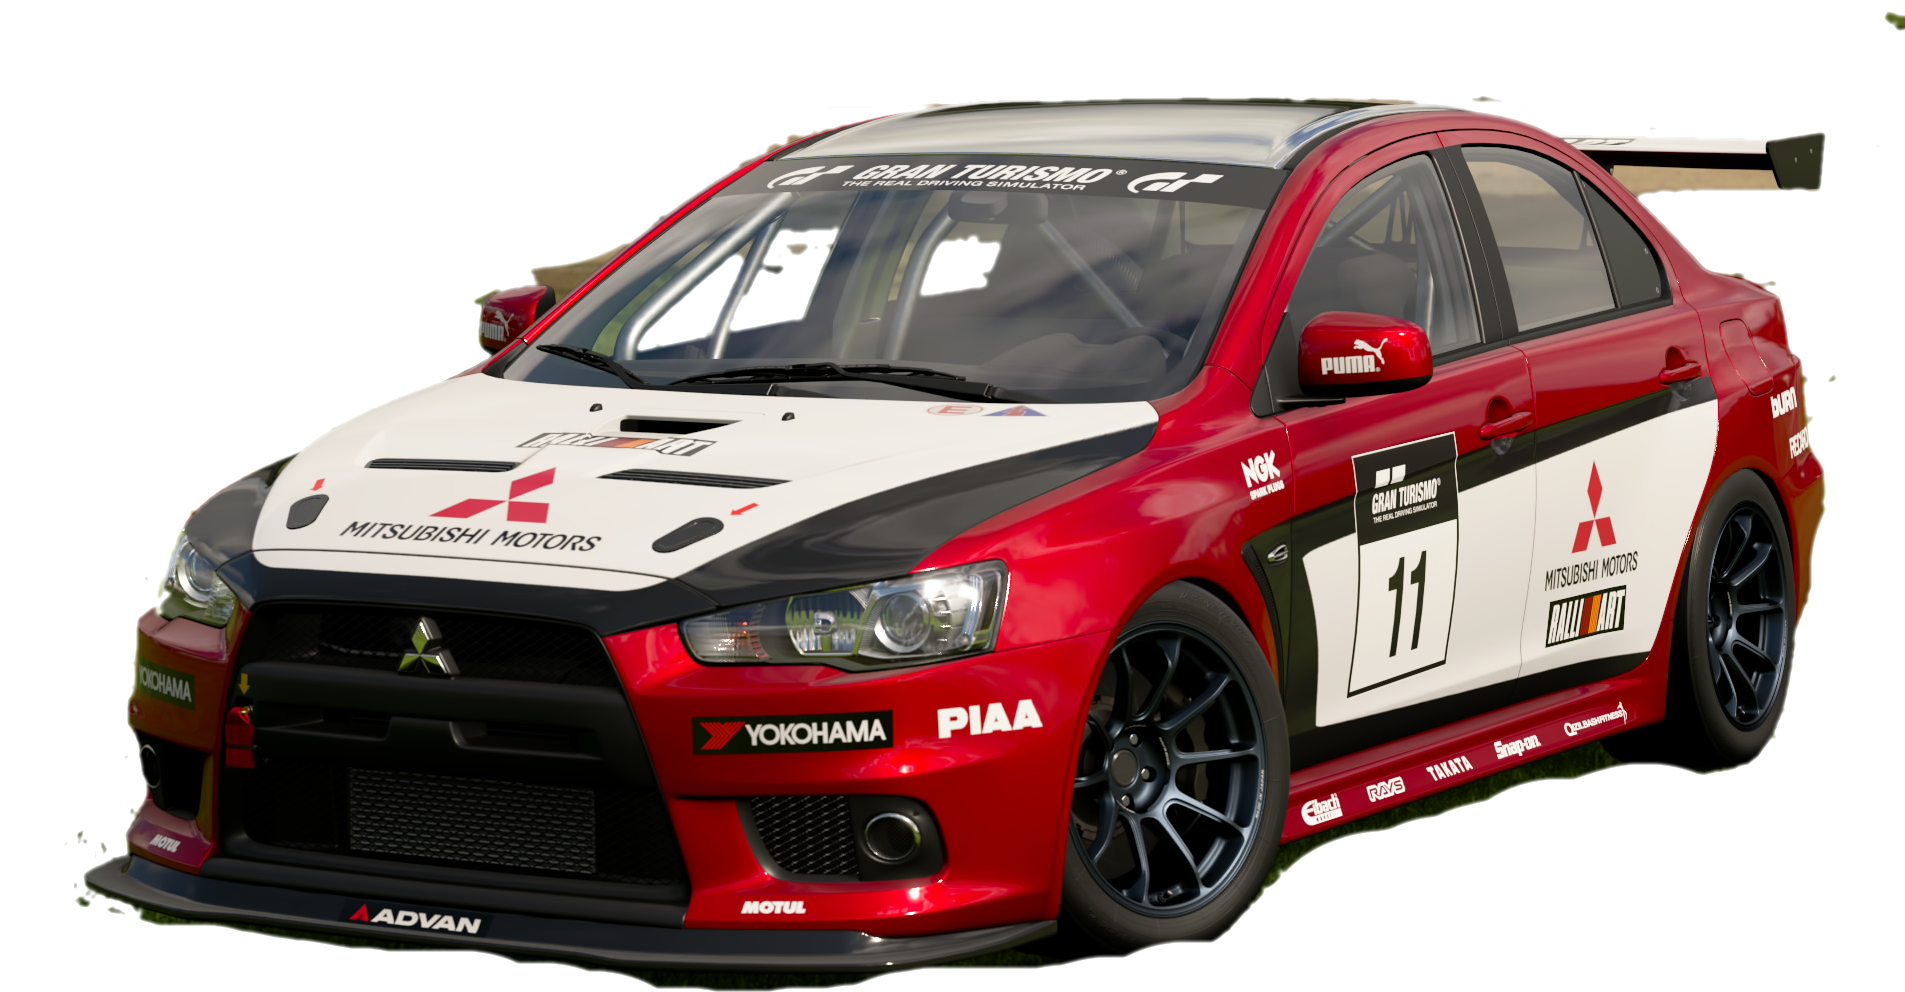 A Red And White Race Car